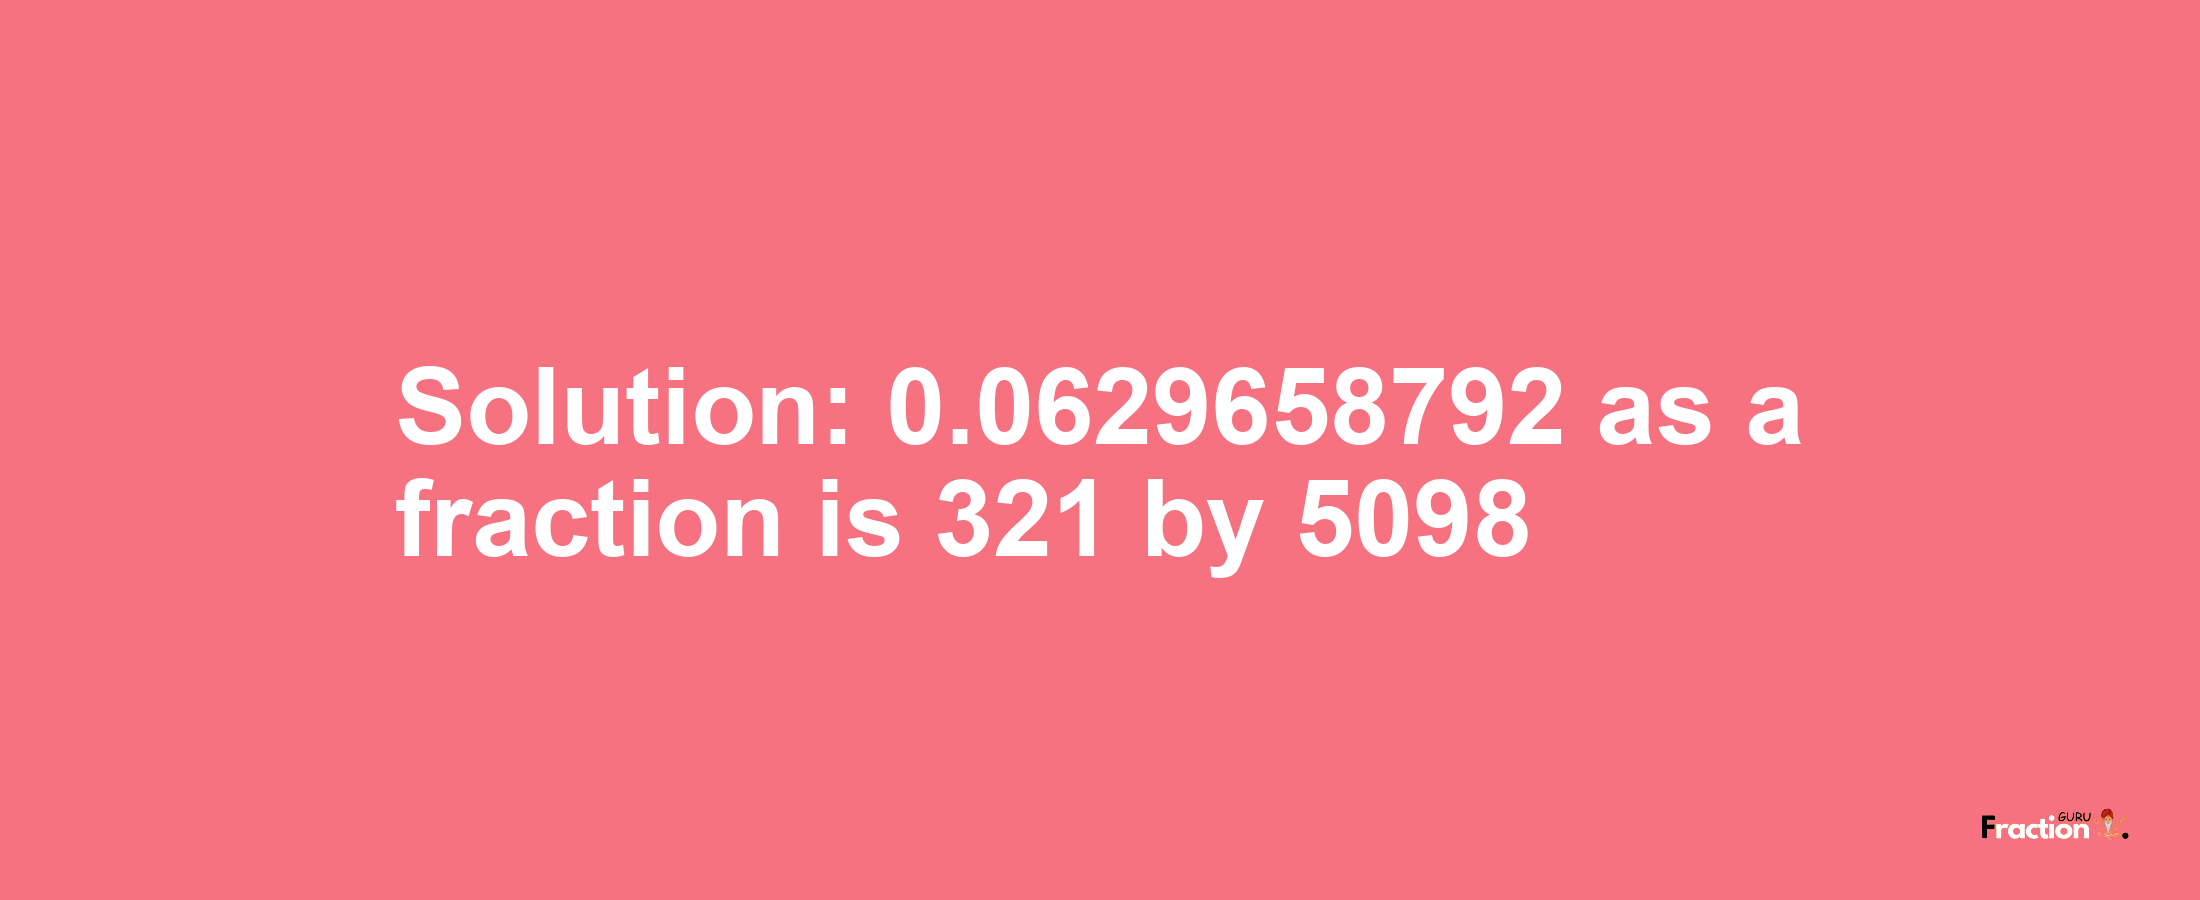 Solution:0.0629658792 as a fraction is 321/5098